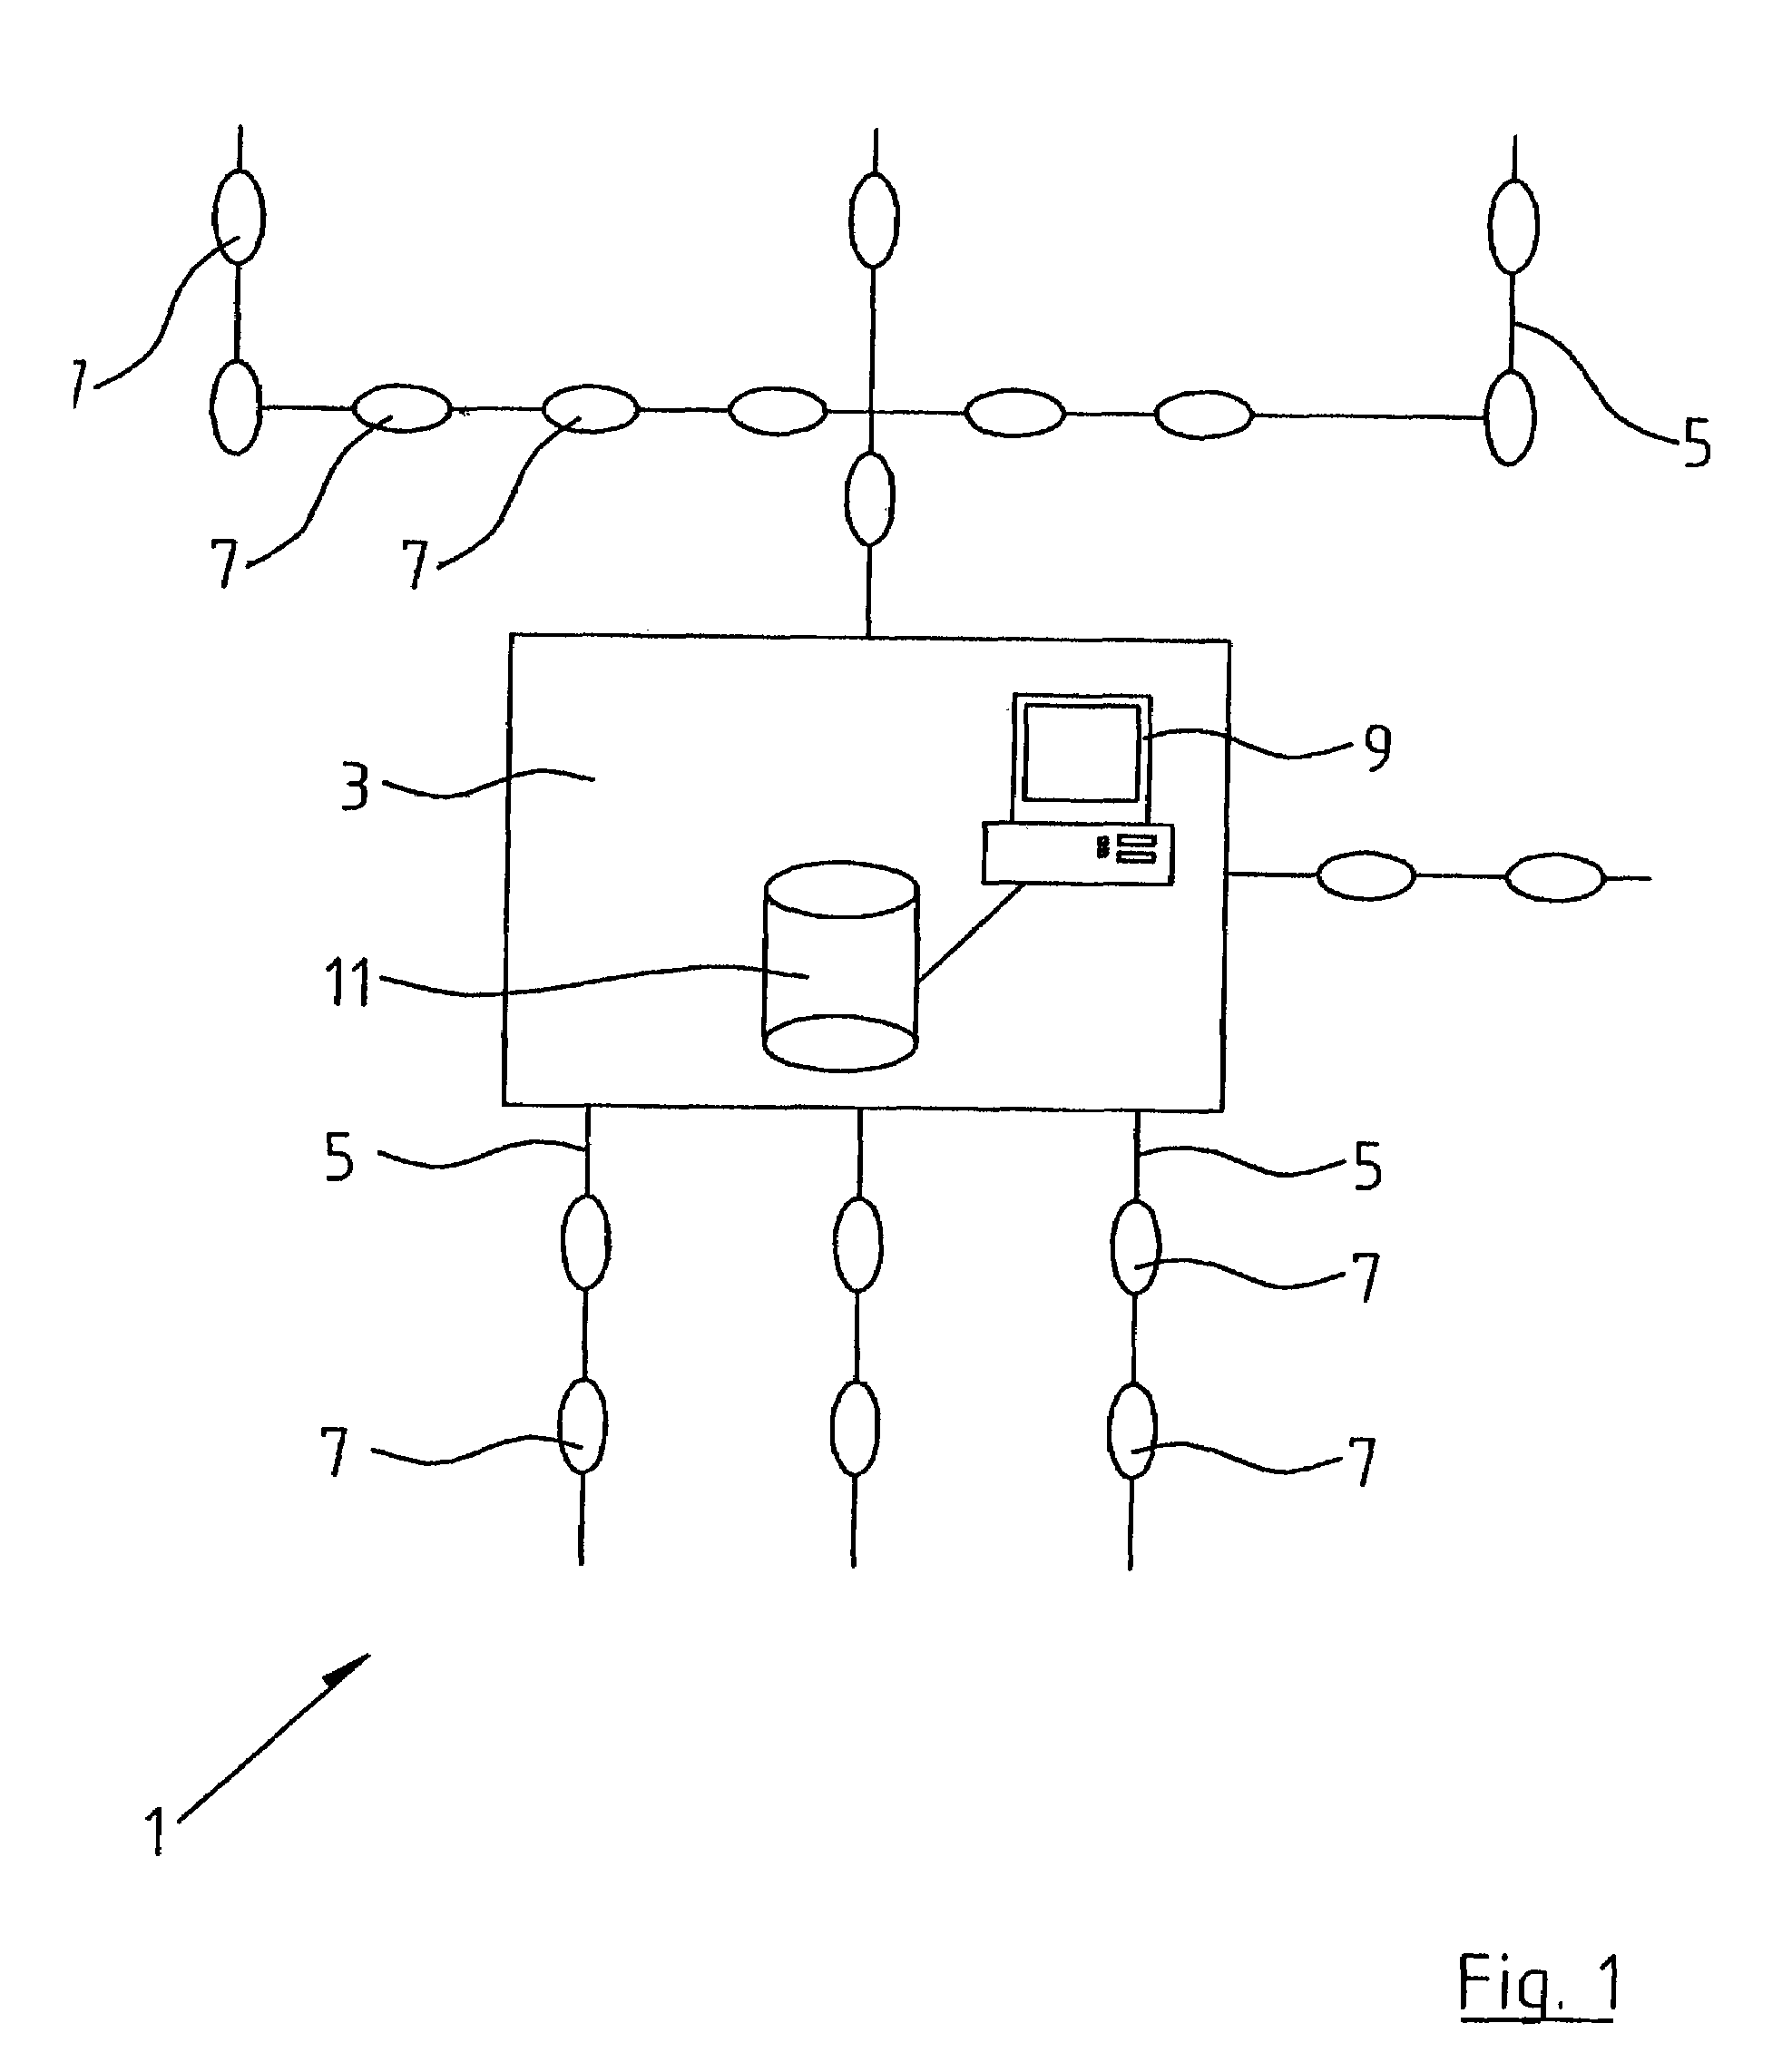 Method of monitoring line faults in a medium voltage network